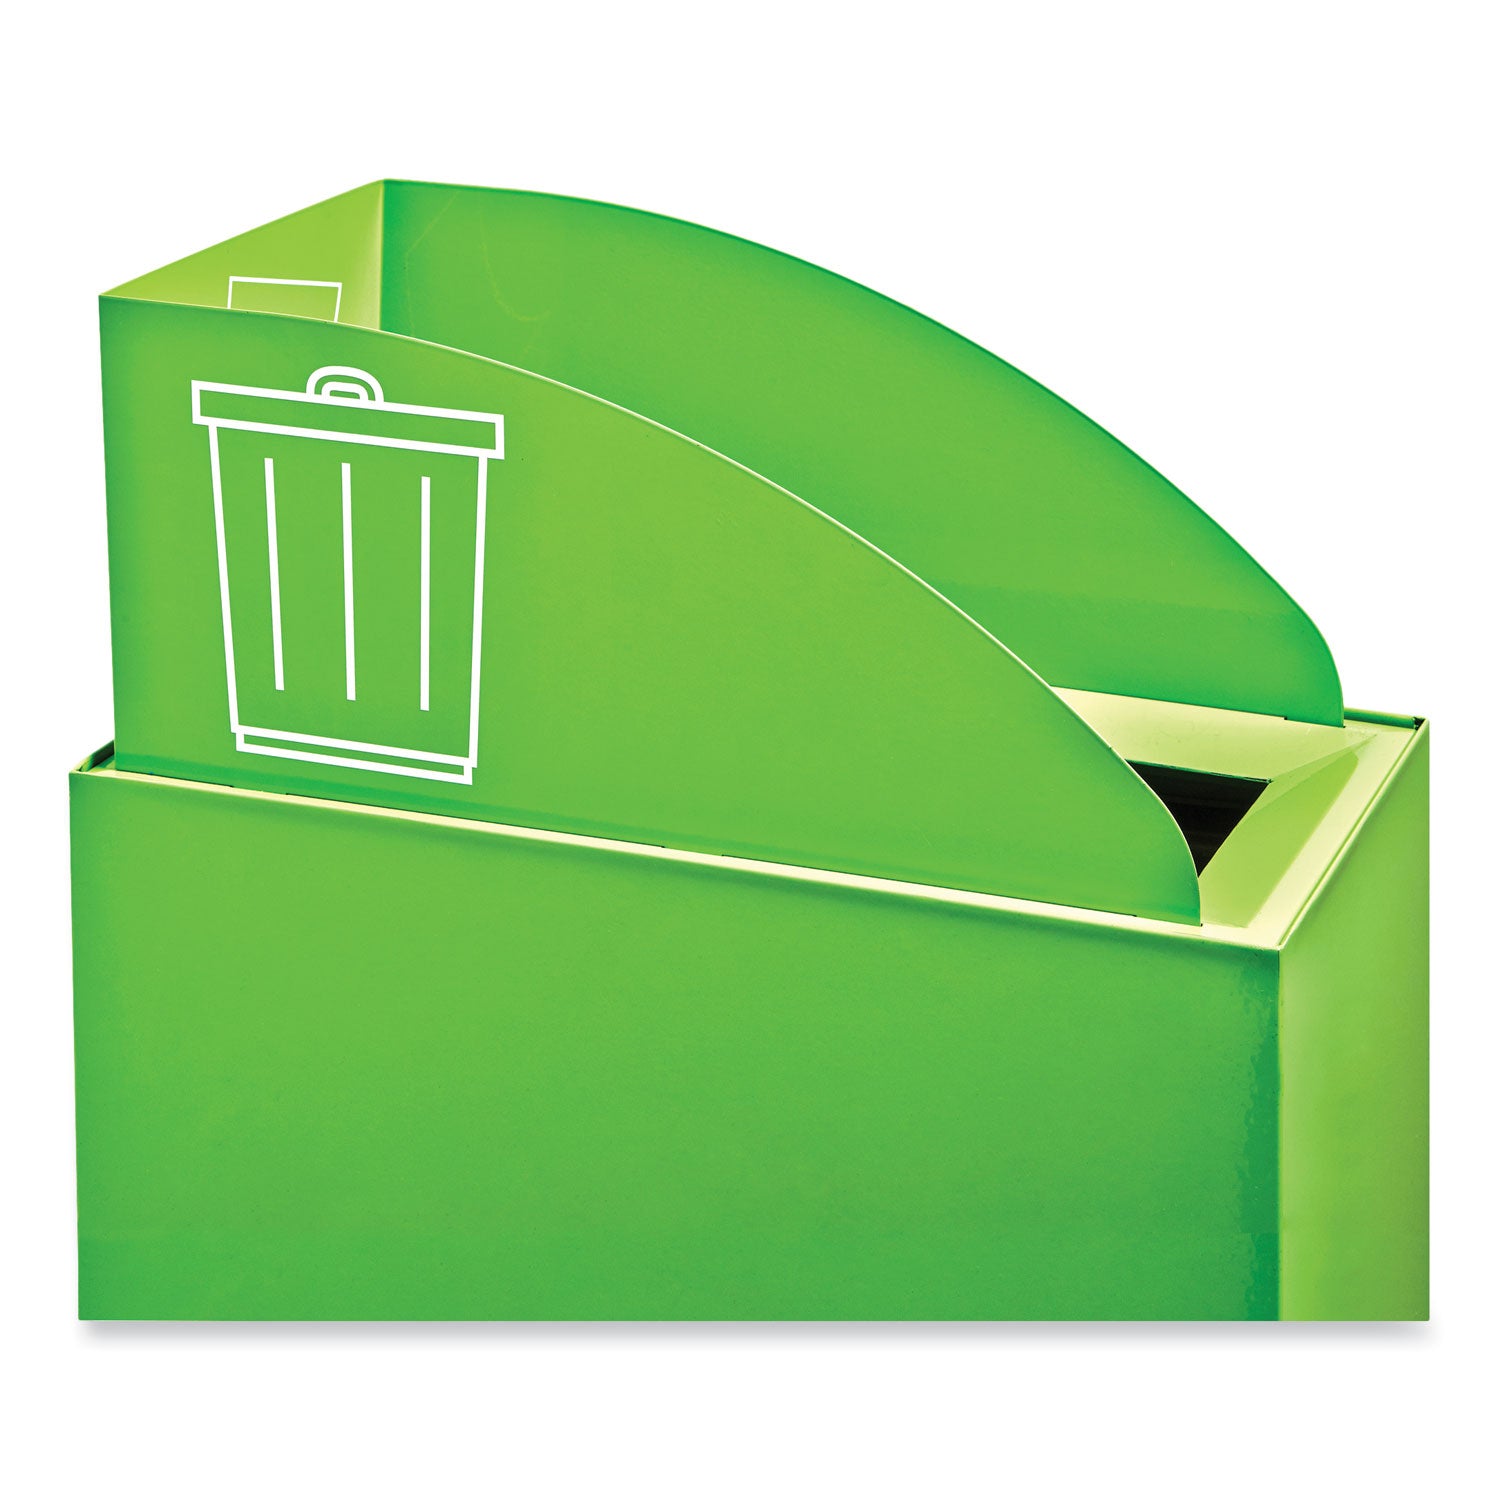 mixx-recycling-center-lid-topper-style-987w-x-1987d-x-062h-green-ships-in-1-3-business-days_saf9449gn - 3